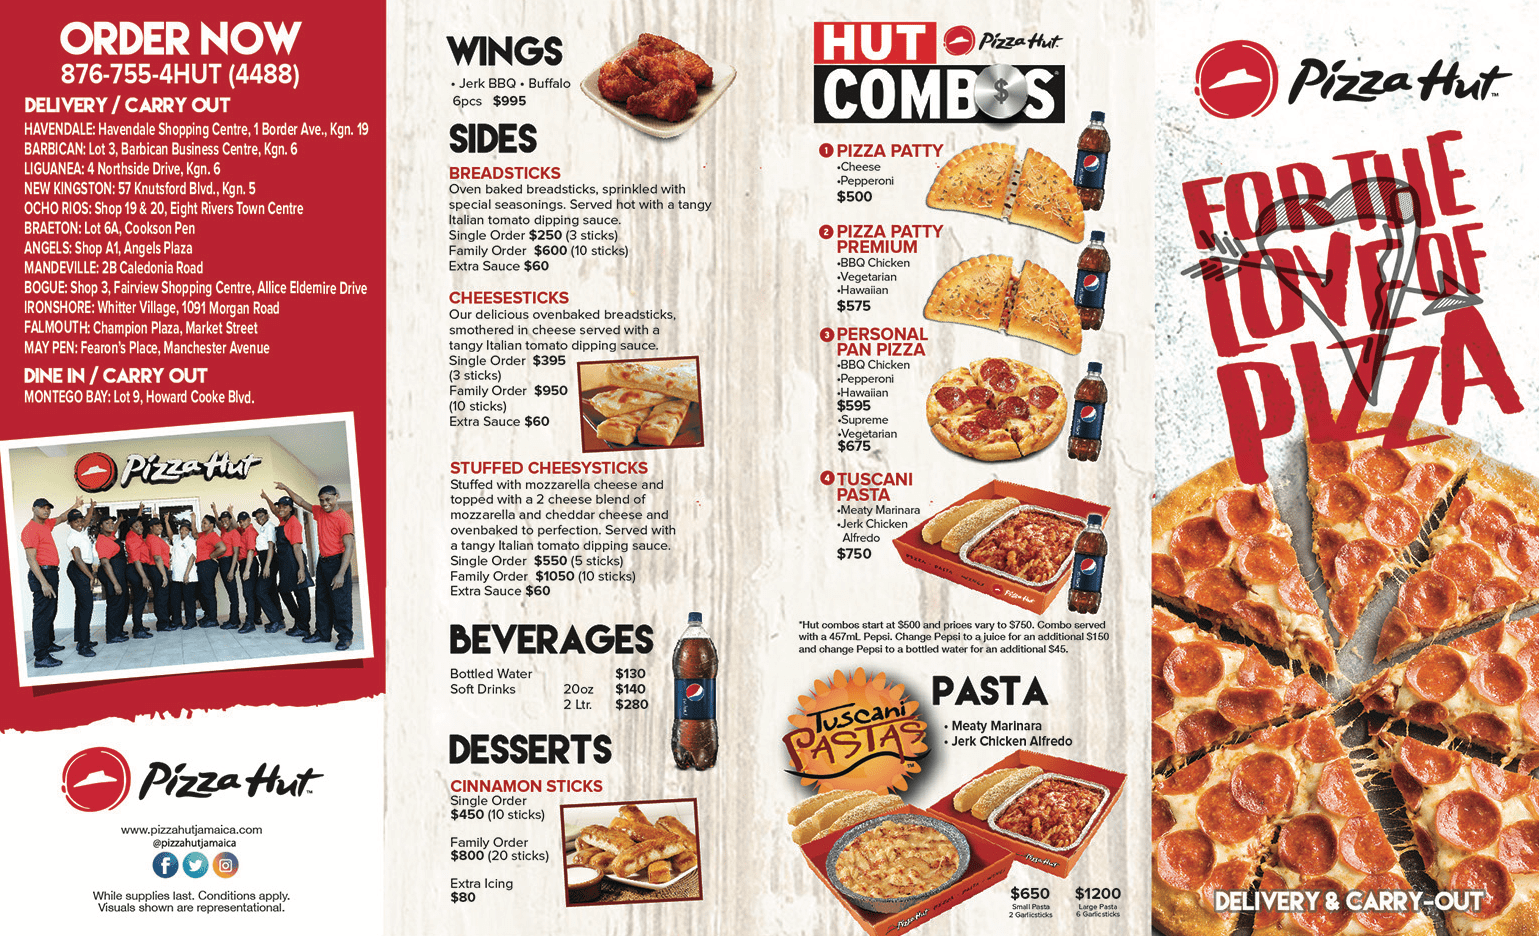 4 rivers menu with prices